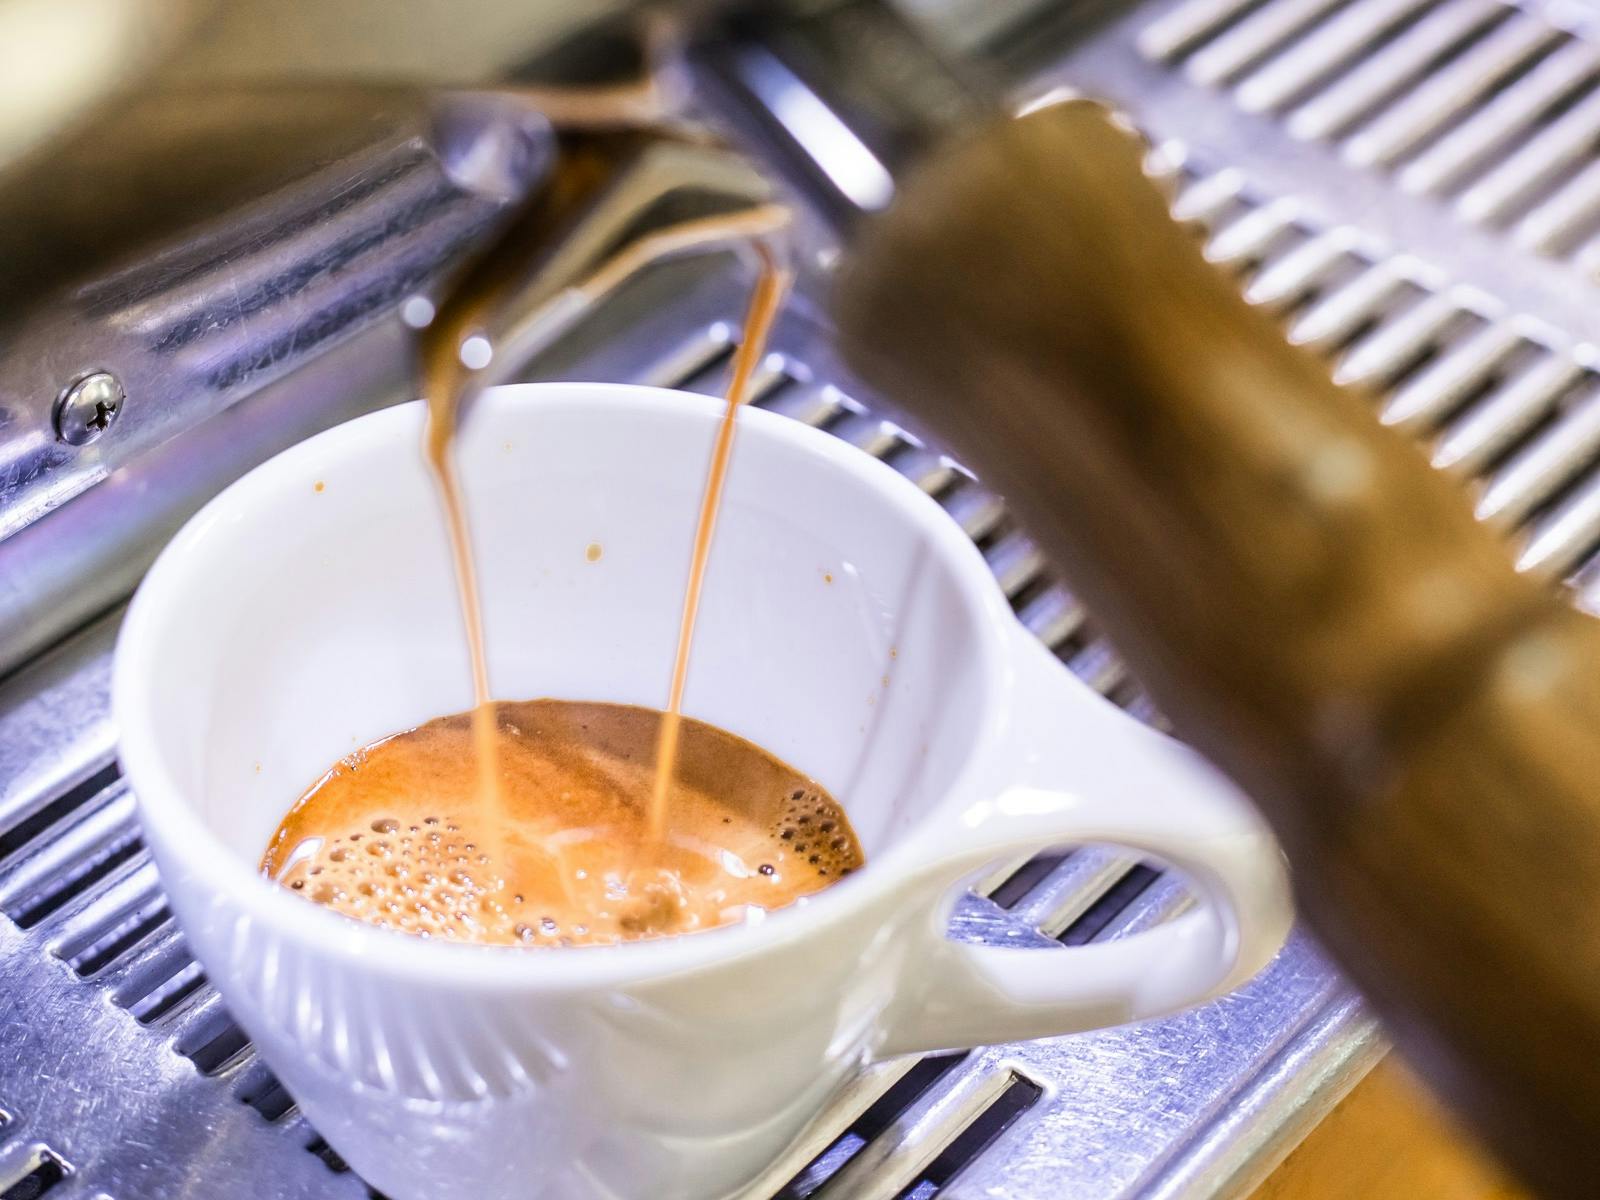 A close up of a double espresso shot pouring out of the machine into a white cup